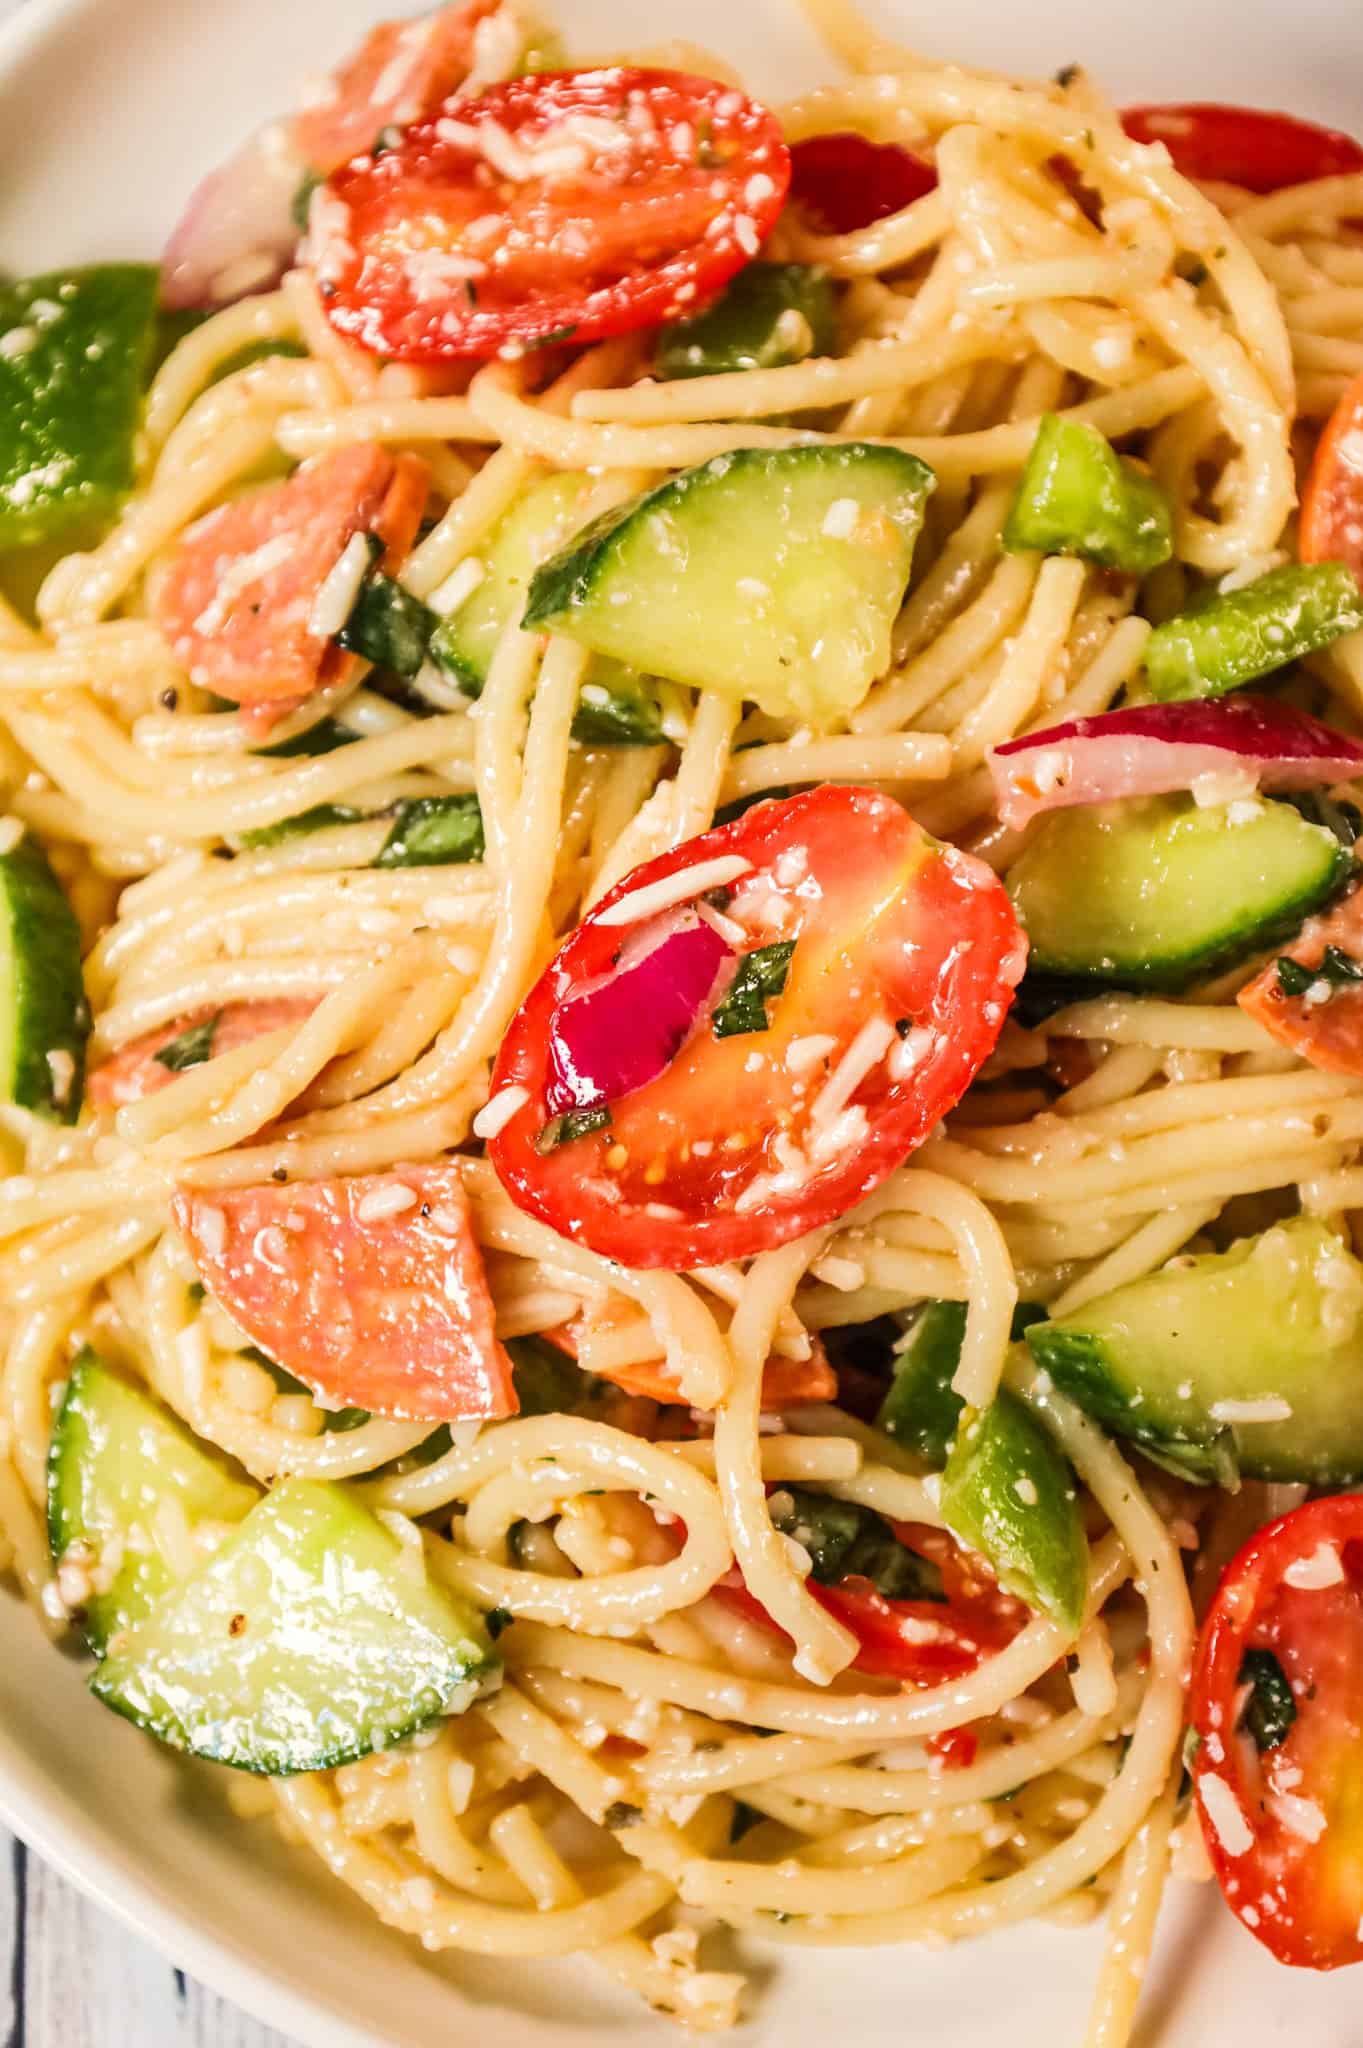 Spaghetti Salad is a tasty pasta salad recipe loaded with cucumbers, grape tomatoes, green peppers, red onions, pepperoni and grated parmesan all tossed in Italian dressing.